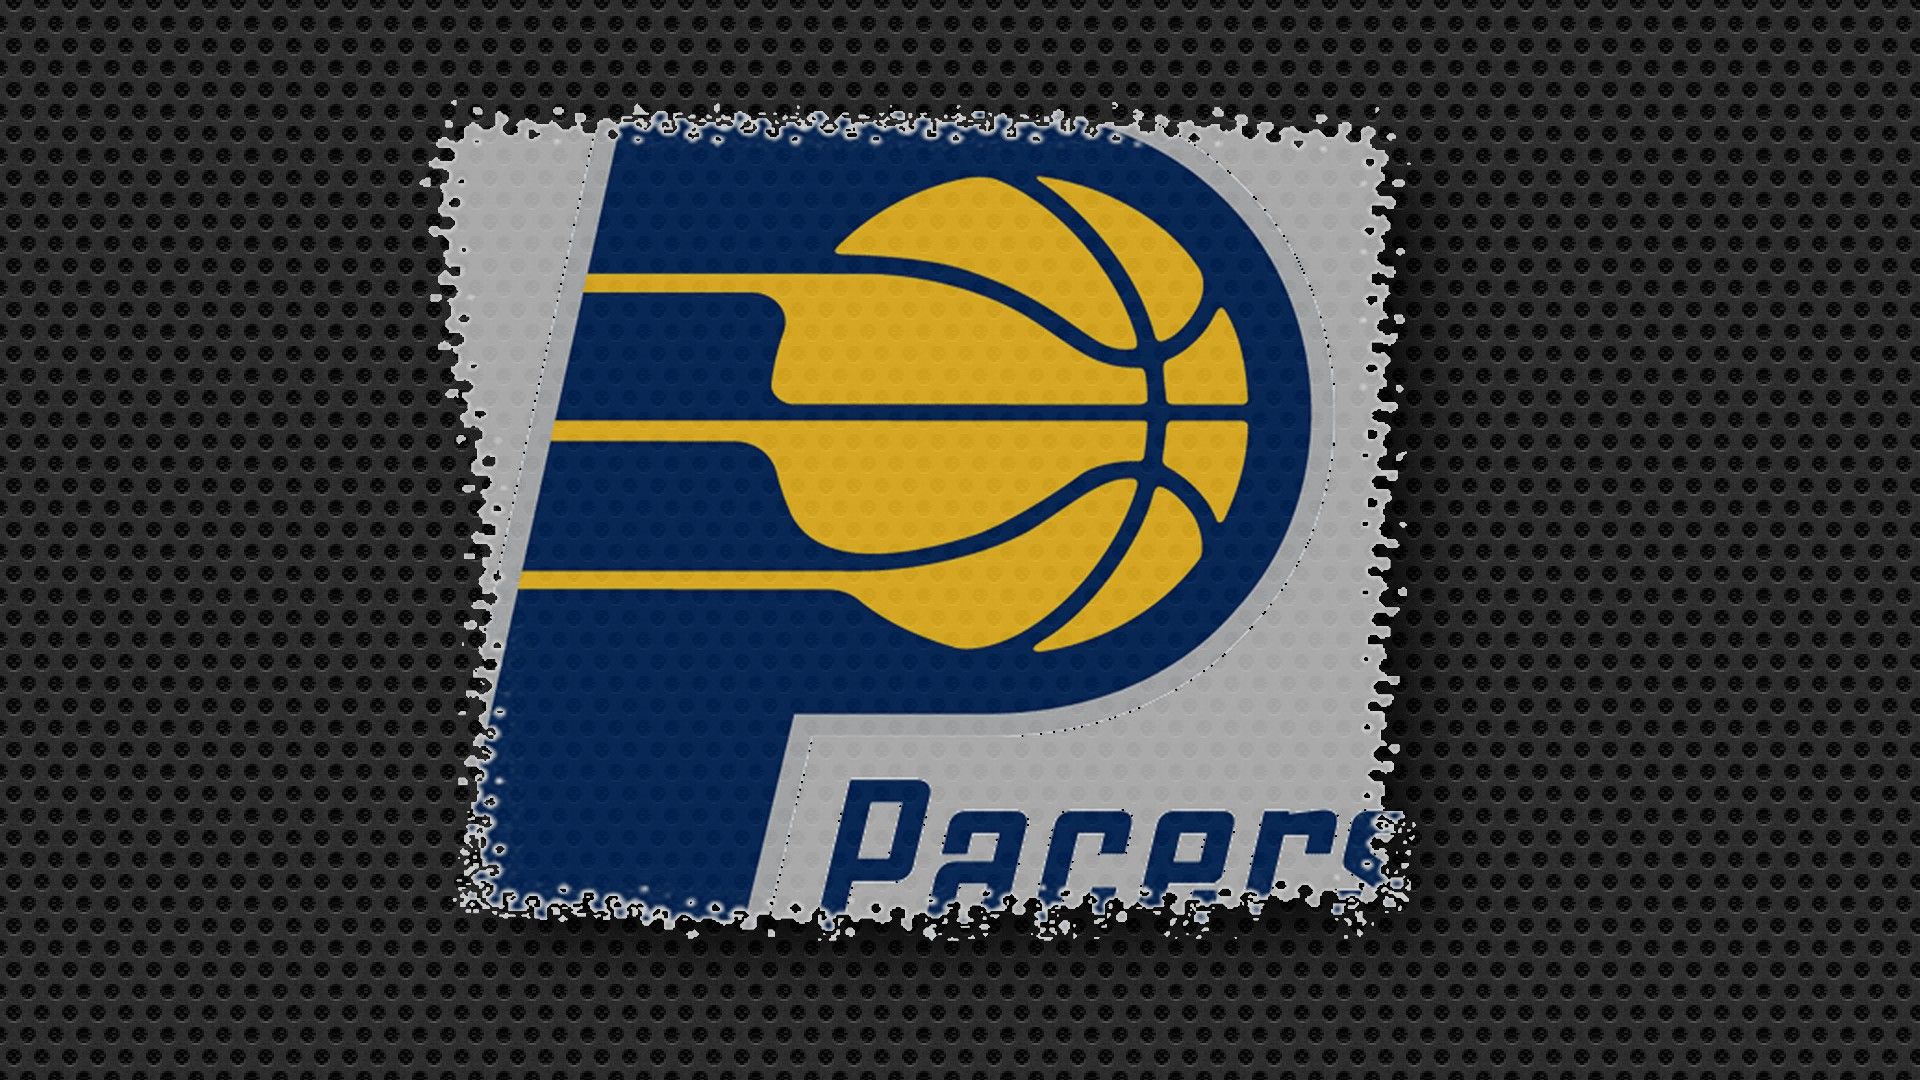 Indiana Pacers Logo On Carbon Black 1920x1080 HD NBA / Indiana Pacers